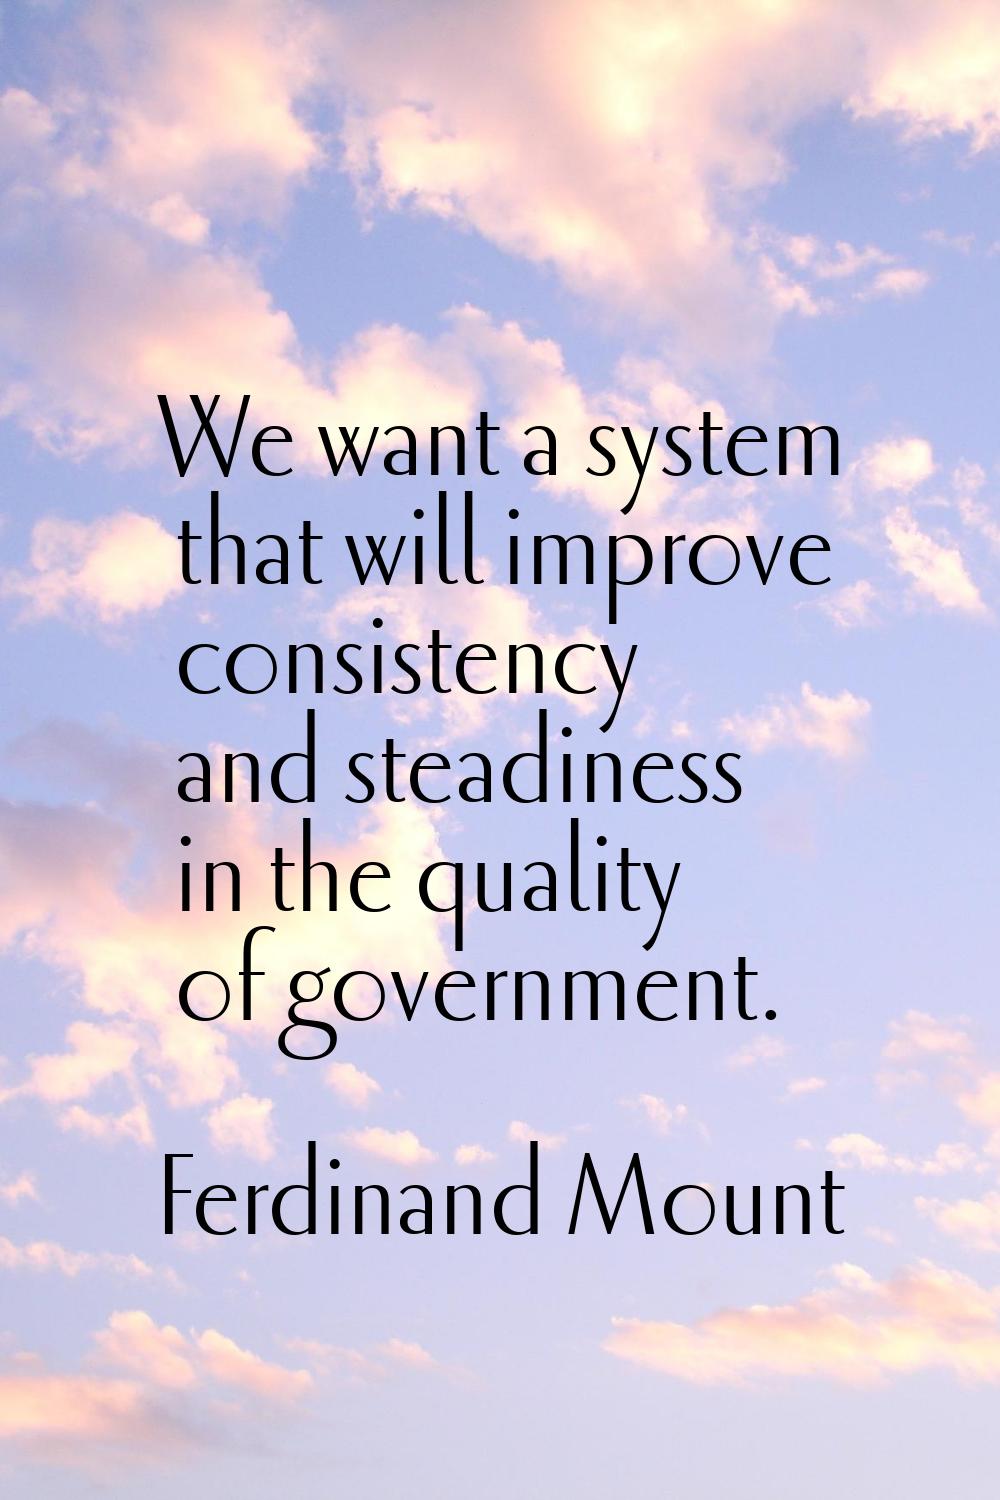 We want a system that will improve consistency and steadiness in the quality of government.